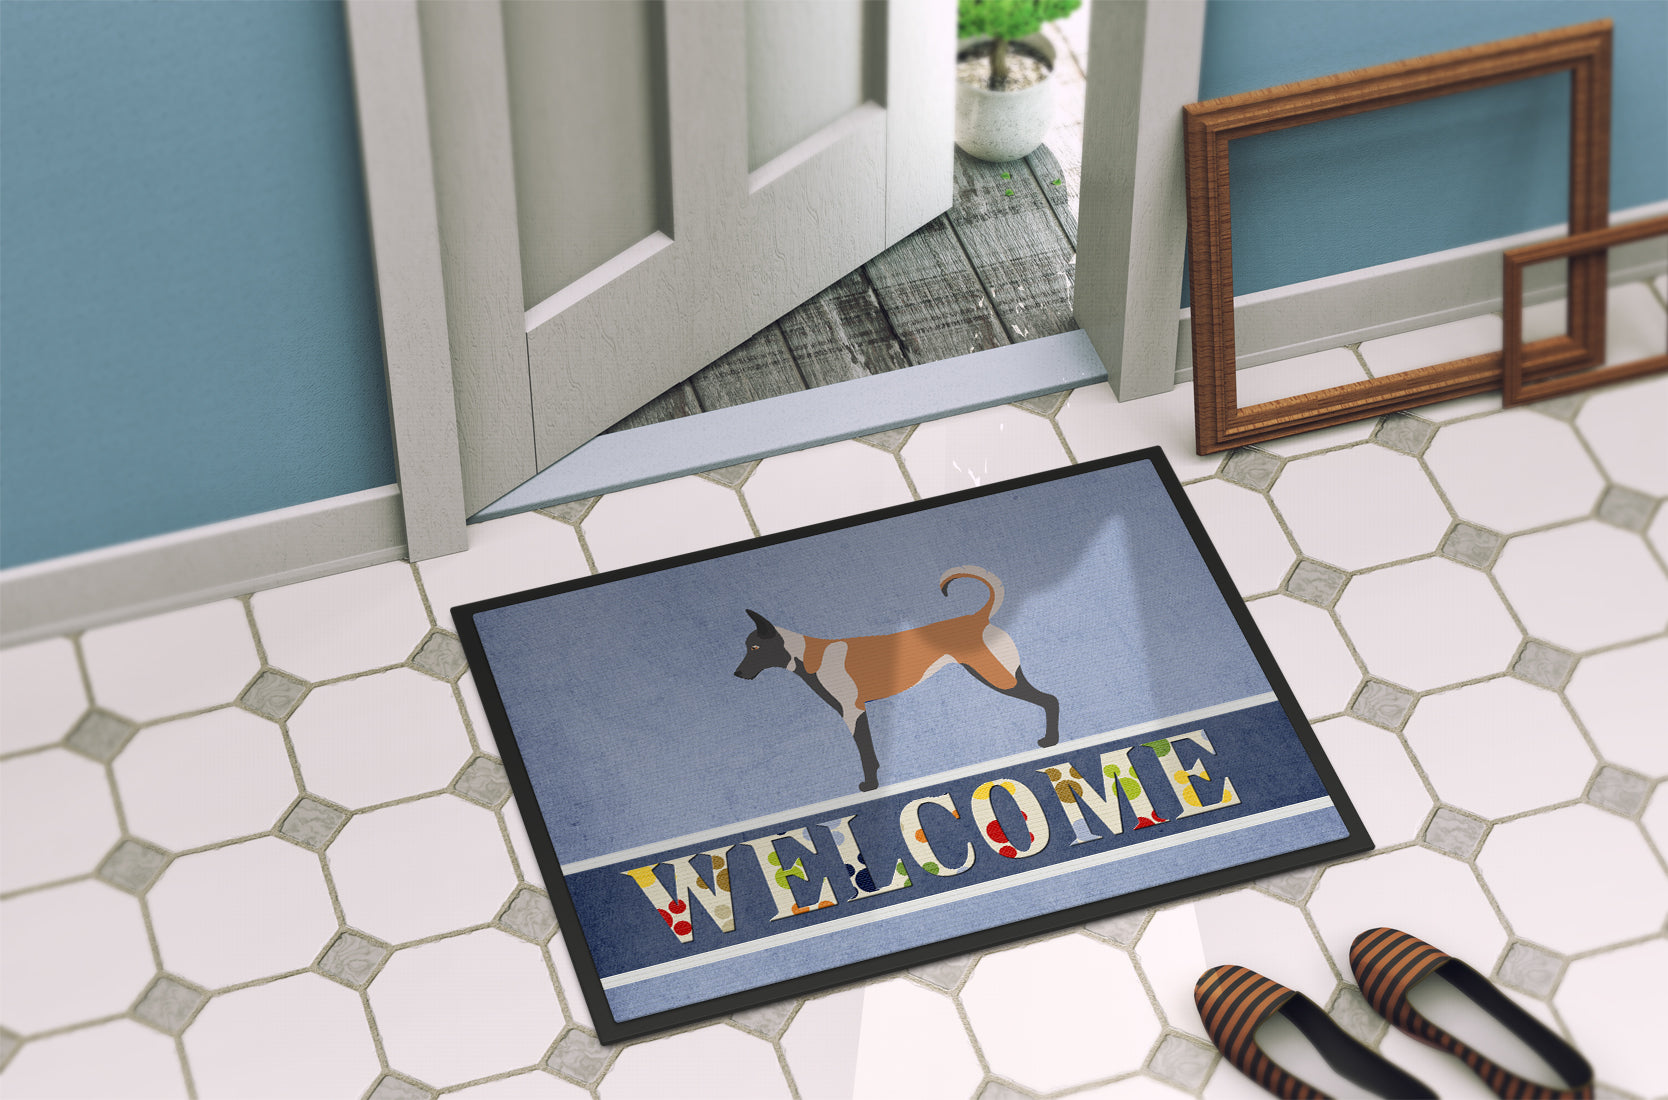 Malinois Welcome Indoor or Outdoor Mat 18x27 BB8299MAT - the-store.com